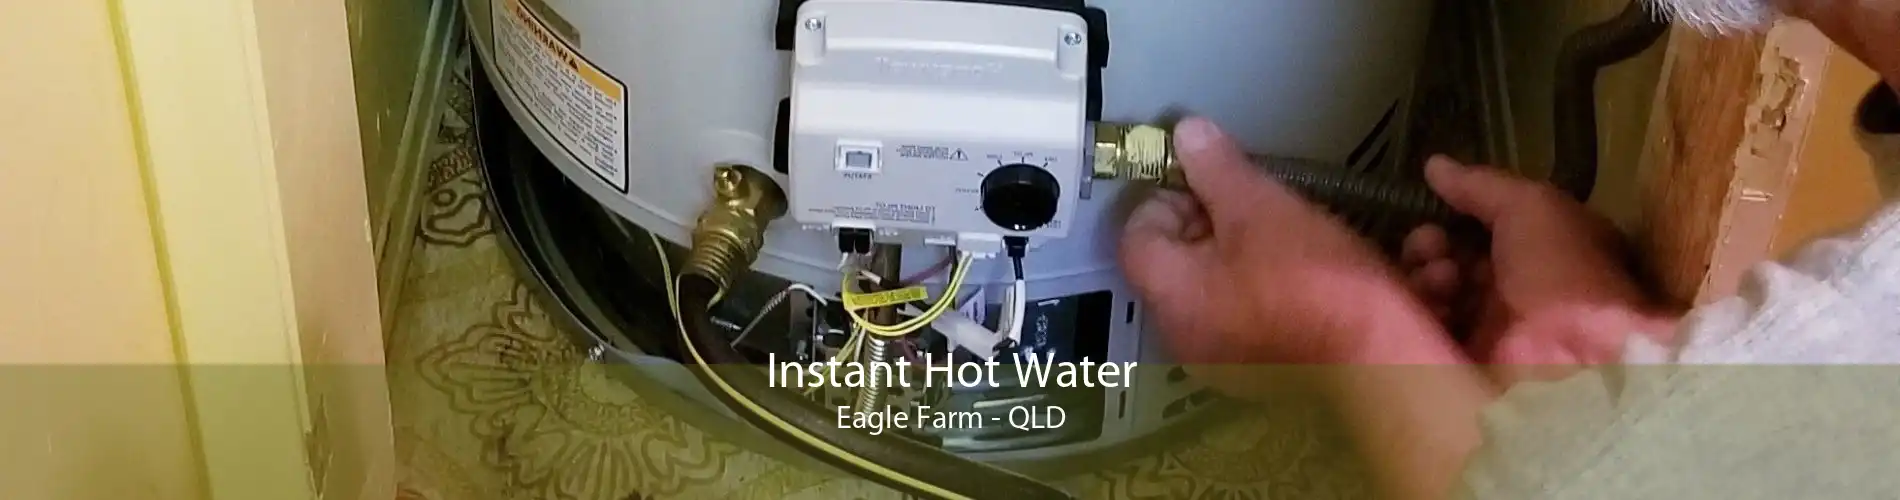 Instant Hot Water Eagle Farm - QLD